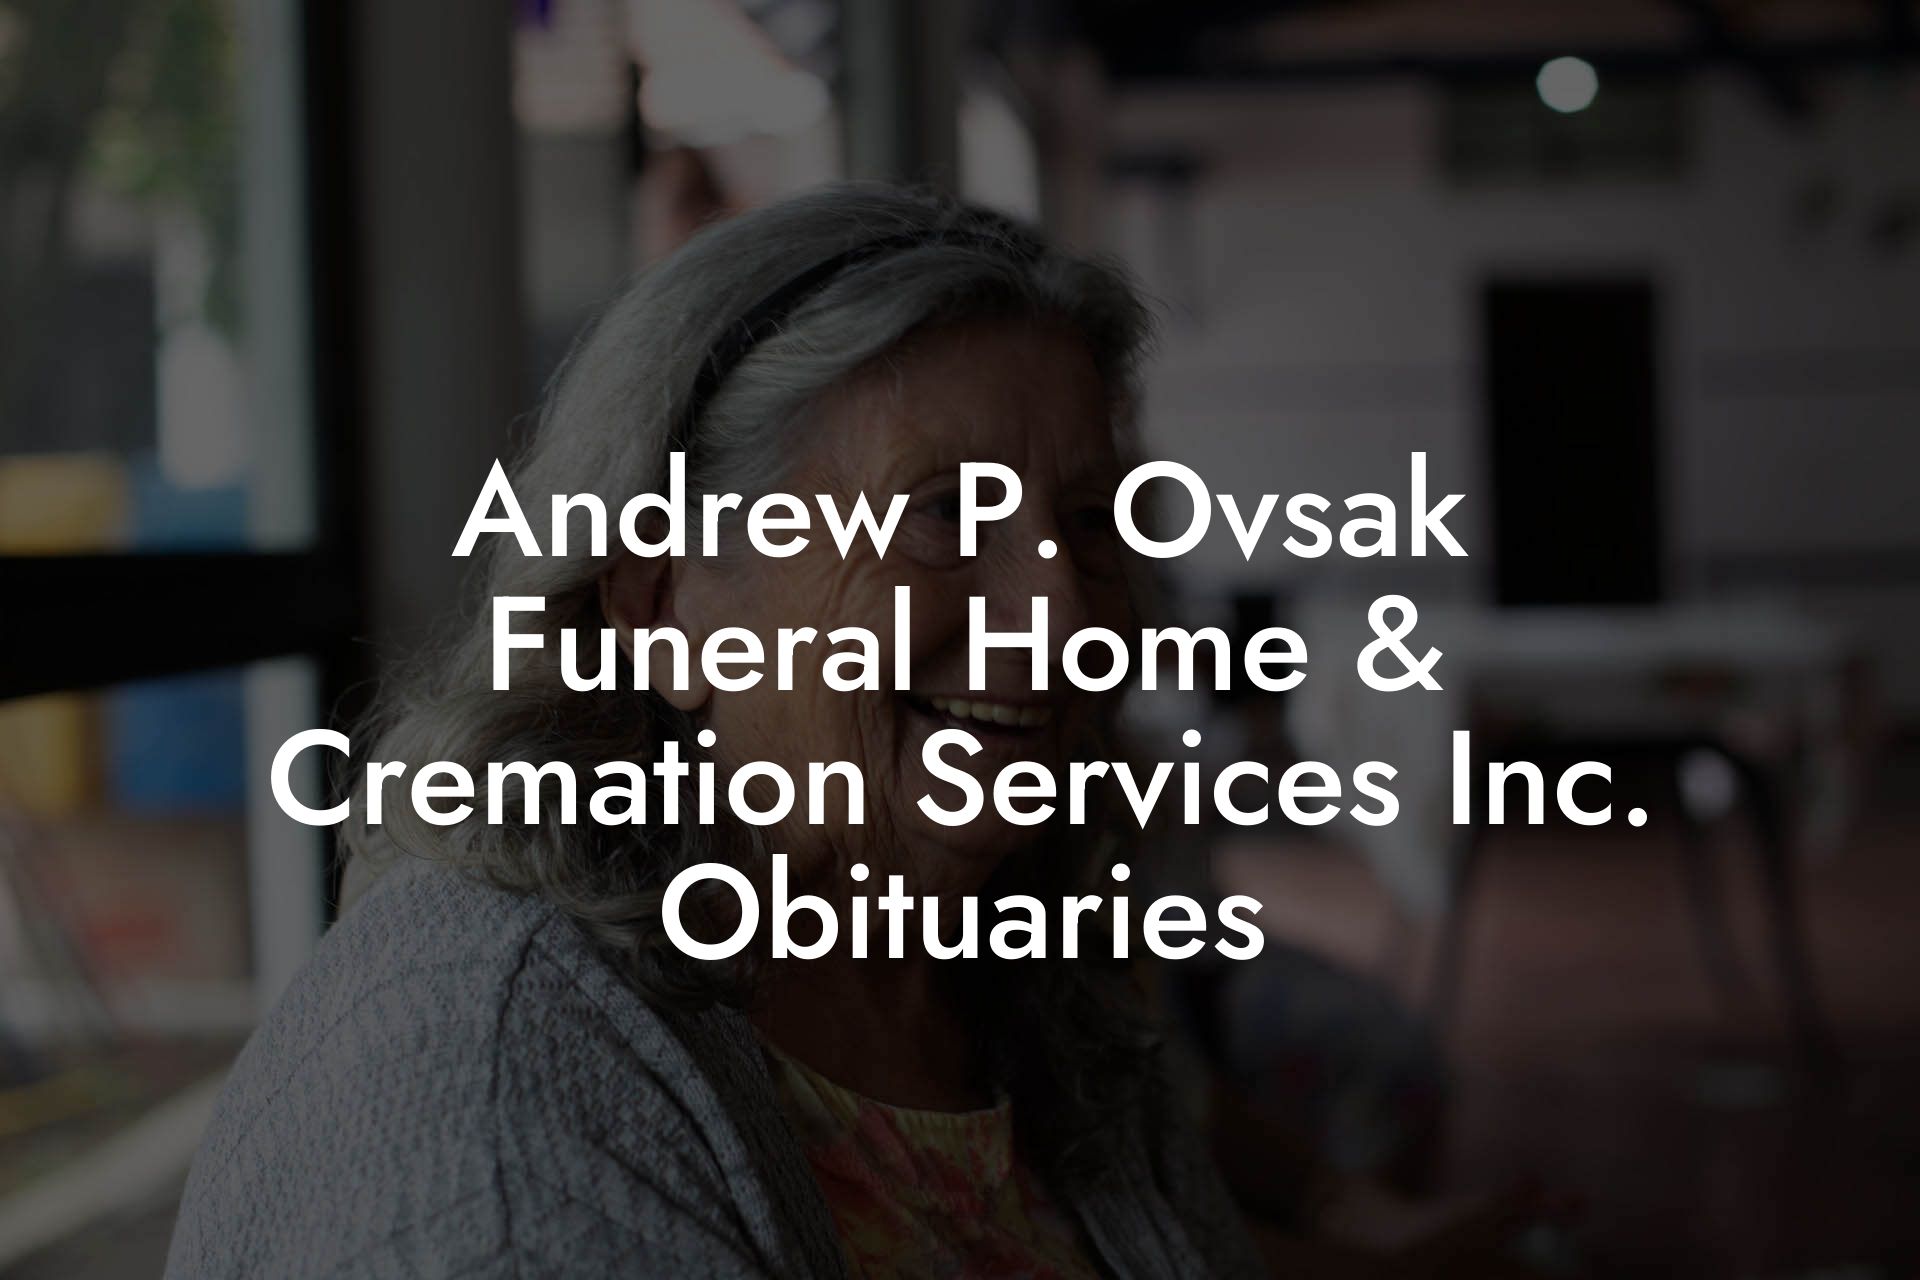 Andrew P. Ovsak Funeral Home & Cremation Services Inc. Obituaries